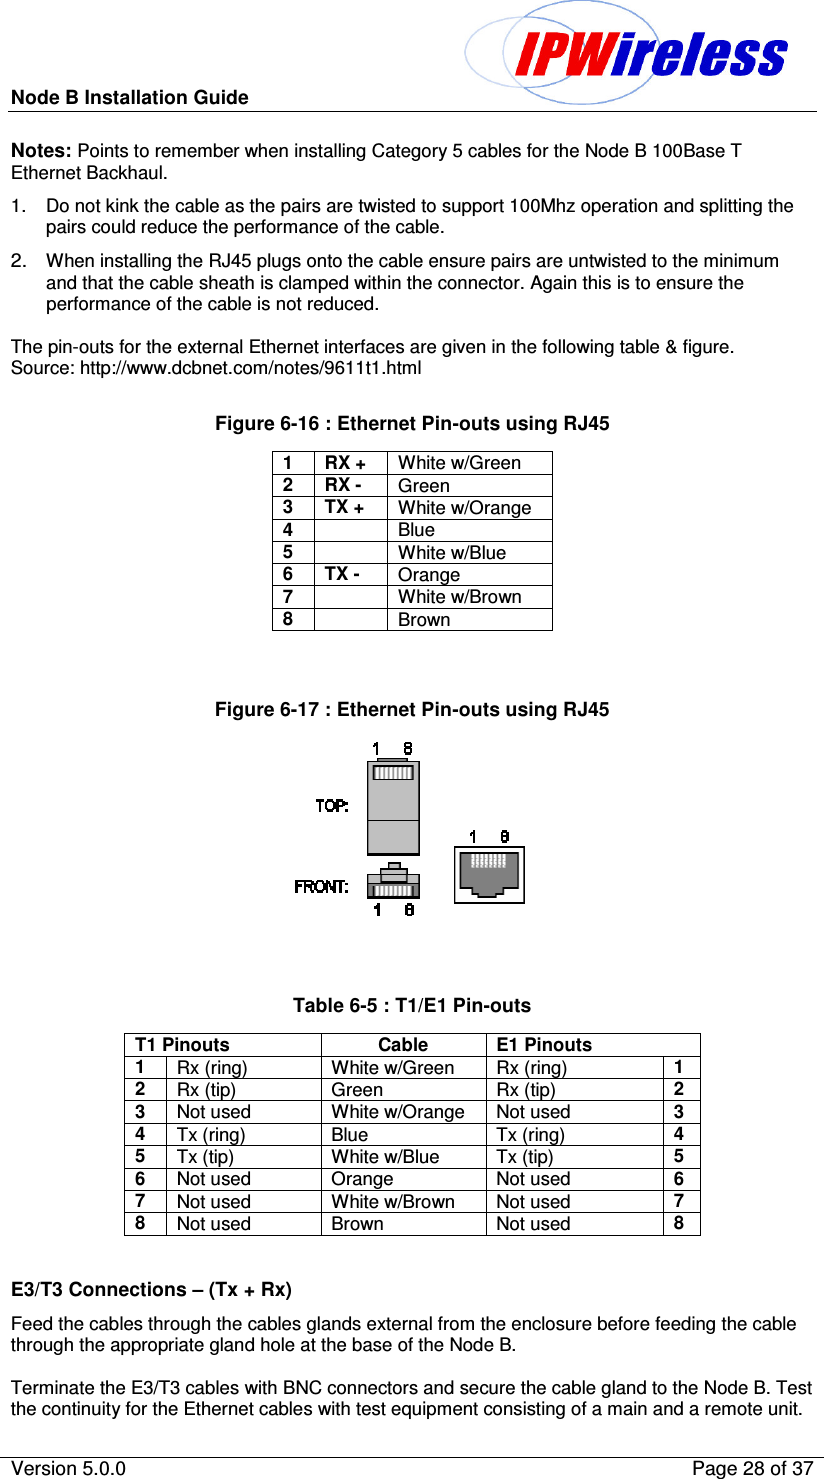 Node B Installation Guide                                              Version 5.0.0    Page 28 of 37  Notes: Points to remember when installing Category 5 cables for the Node B 100Base T Ethernet Backhaul. 1.  Do not kink the cable as the pairs are twisted to support 100Mhz operation and splitting the pairs could reduce the performance of the cable. 2. When installing the RJ45 plugs onto the cable ensure pairs are untwisted to the minimum and that the cable sheath is clamped within the connector. Again this is to ensure the performance of the cable is not reduced.  The pin-outs for the external Ethernet interfaces are given in the following table &amp; figure. Source: http://www.dcbnet.com/notes/9611t1.html  Figure 6-16 : Ethernet Pin-outs using RJ45 1  RX +  White w/Green 2  RX -  Green 3  TX +  White w/Orange 4    Blue 5    White w/Blue 6  TX -  Orange 7    White w/Brown 8    Brown   Figure 6-17 : Ethernet Pin-outs using RJ45   Table 6-5 : T1/E1 Pin-outs T1 Pinouts  Cable  E1 Pinouts 1  Rx (ring)  White w/Green Rx (ring)  1 2  Rx (tip)  Green Rx (tip)  2 3  Not used  White w/Orange Not used  3 4  Tx (ring)  Blue Tx (ring)  4 5  Tx (tip)  White w/Blue Tx (tip)  5 6  Not used  Orange Not used  6 7  Not used  White w/Brown Not used  7 8  Not used  Brown Not used  8   E3/T3 Connections – (Tx + Rx) Feed the cables through the cables glands external from the enclosure before feeding the cable through the appropriate gland hole at the base of the Node B.  Terminate the E3/T3 cables with BNC connectors and secure the cable gland to the Node B. Test the continuity for the Ethernet cables with test equipment consisting of a main and a remote unit. 